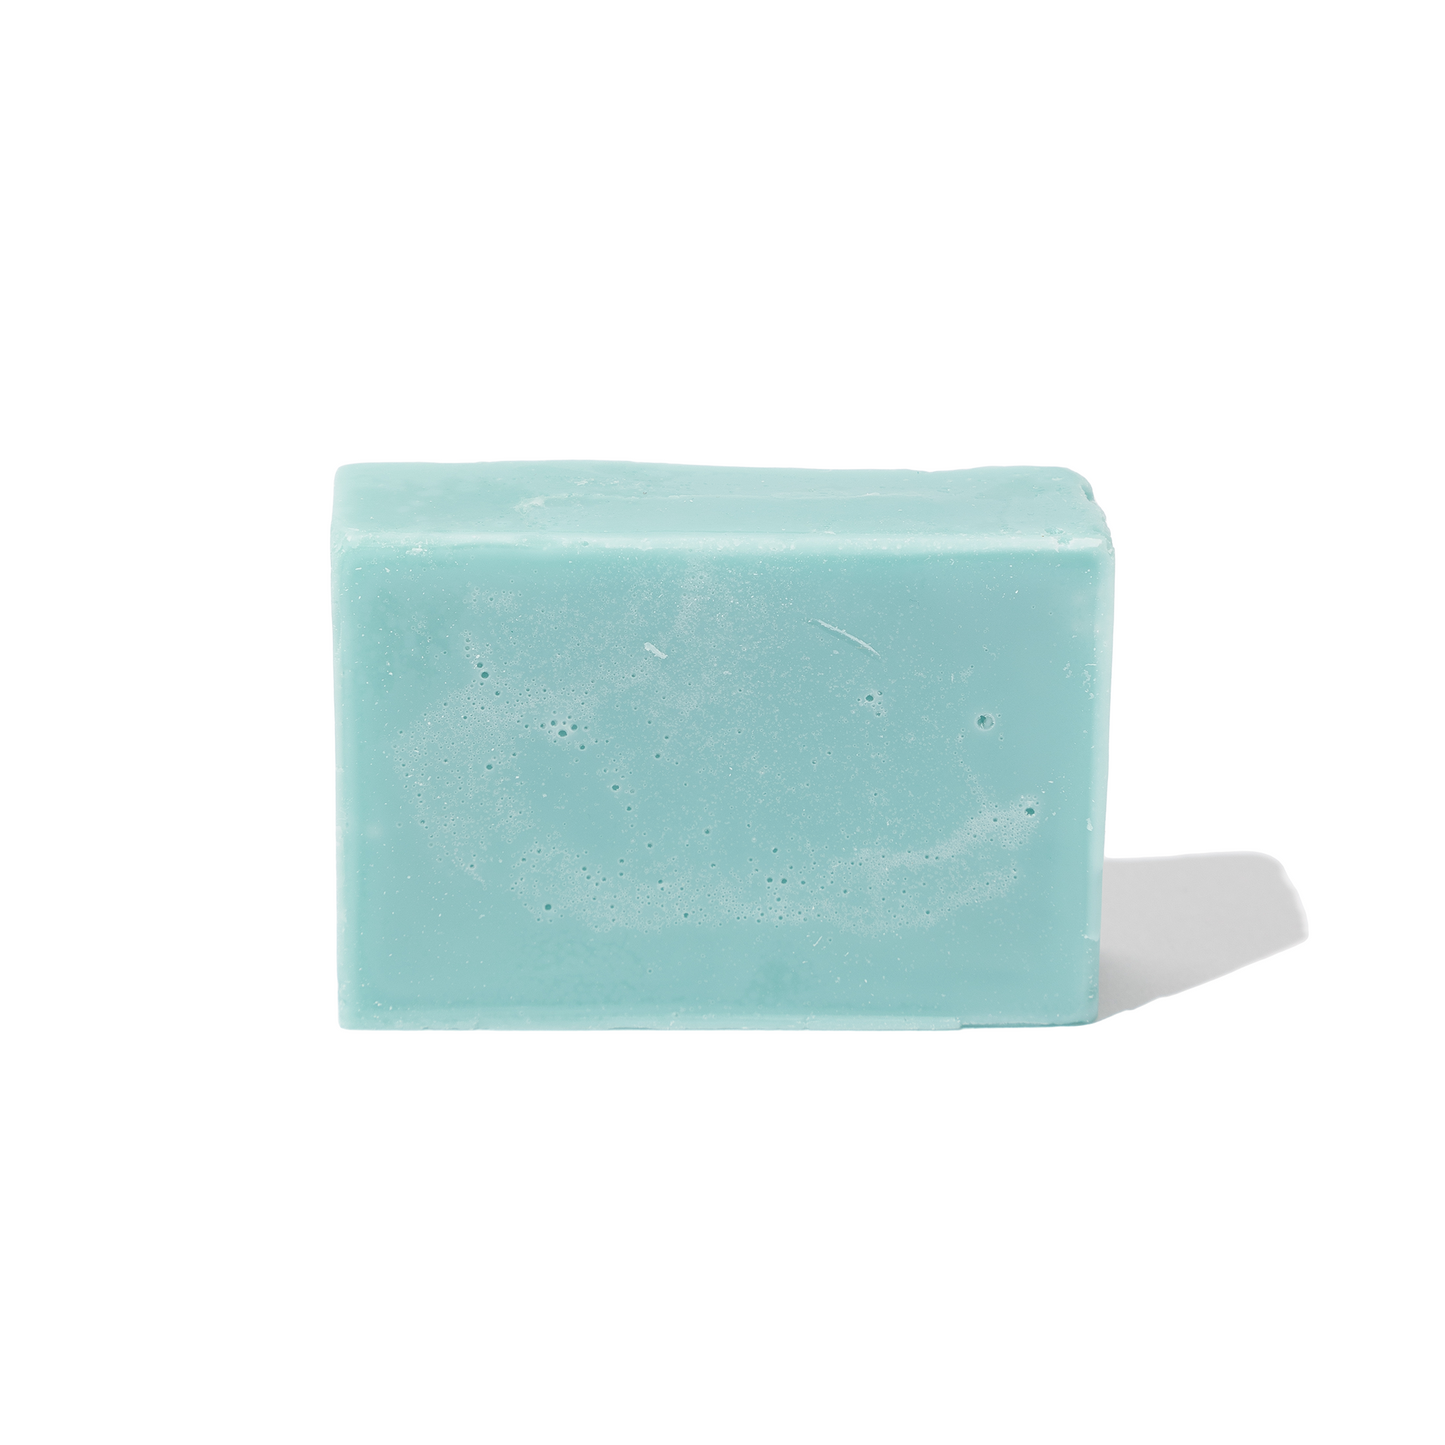 hemp seed oil leave-in conditioner bar